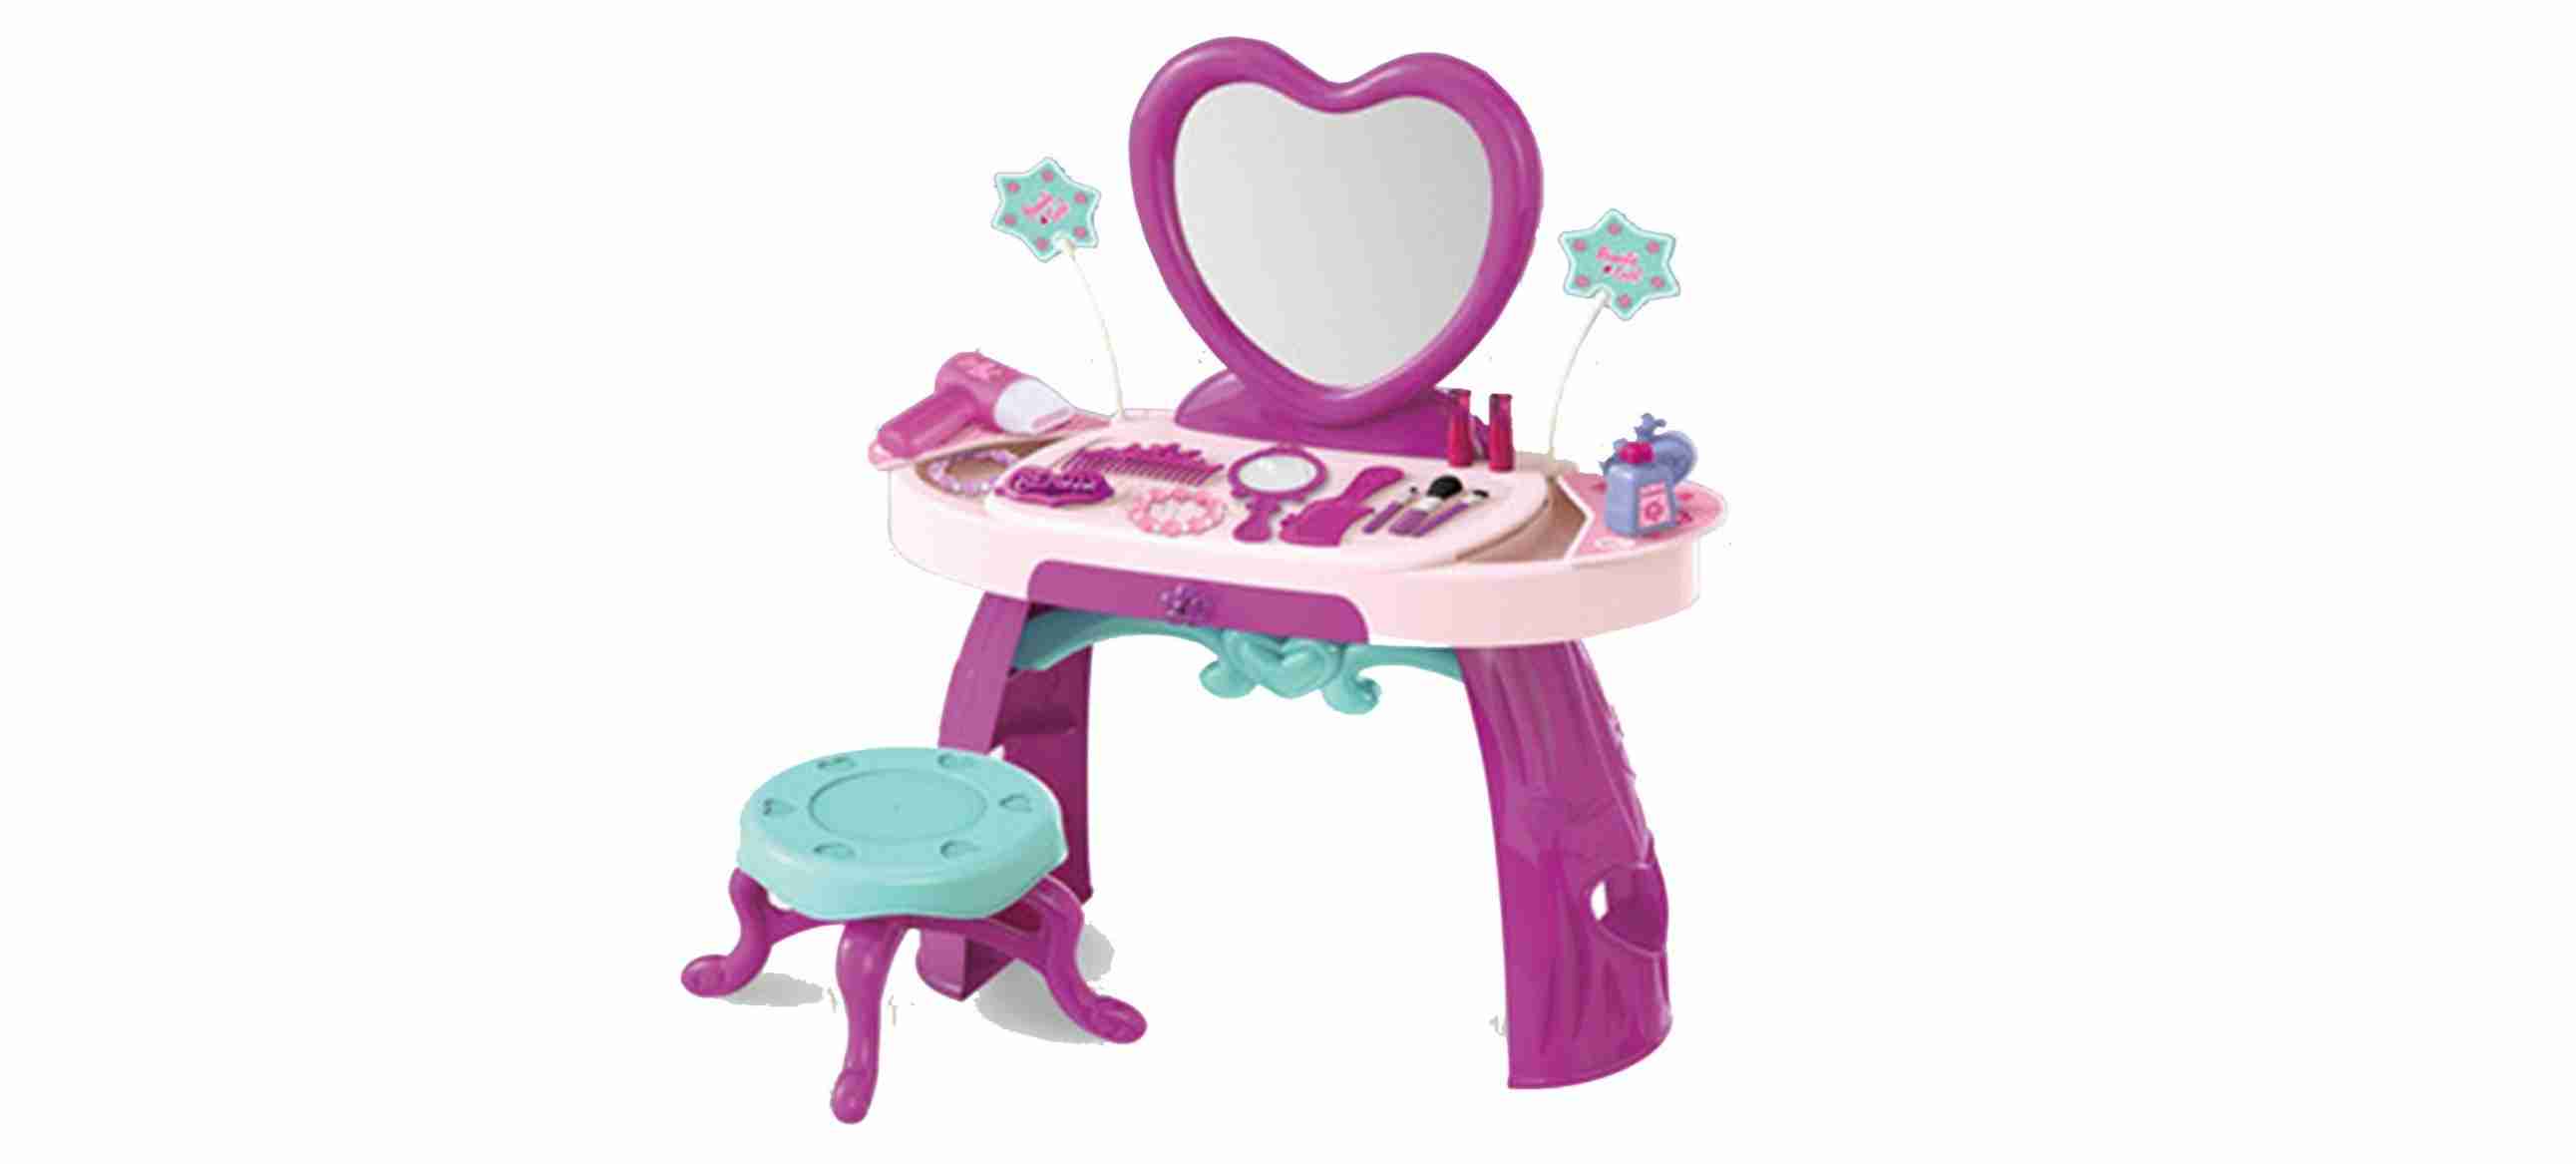 Luxurious Dressing Table Set